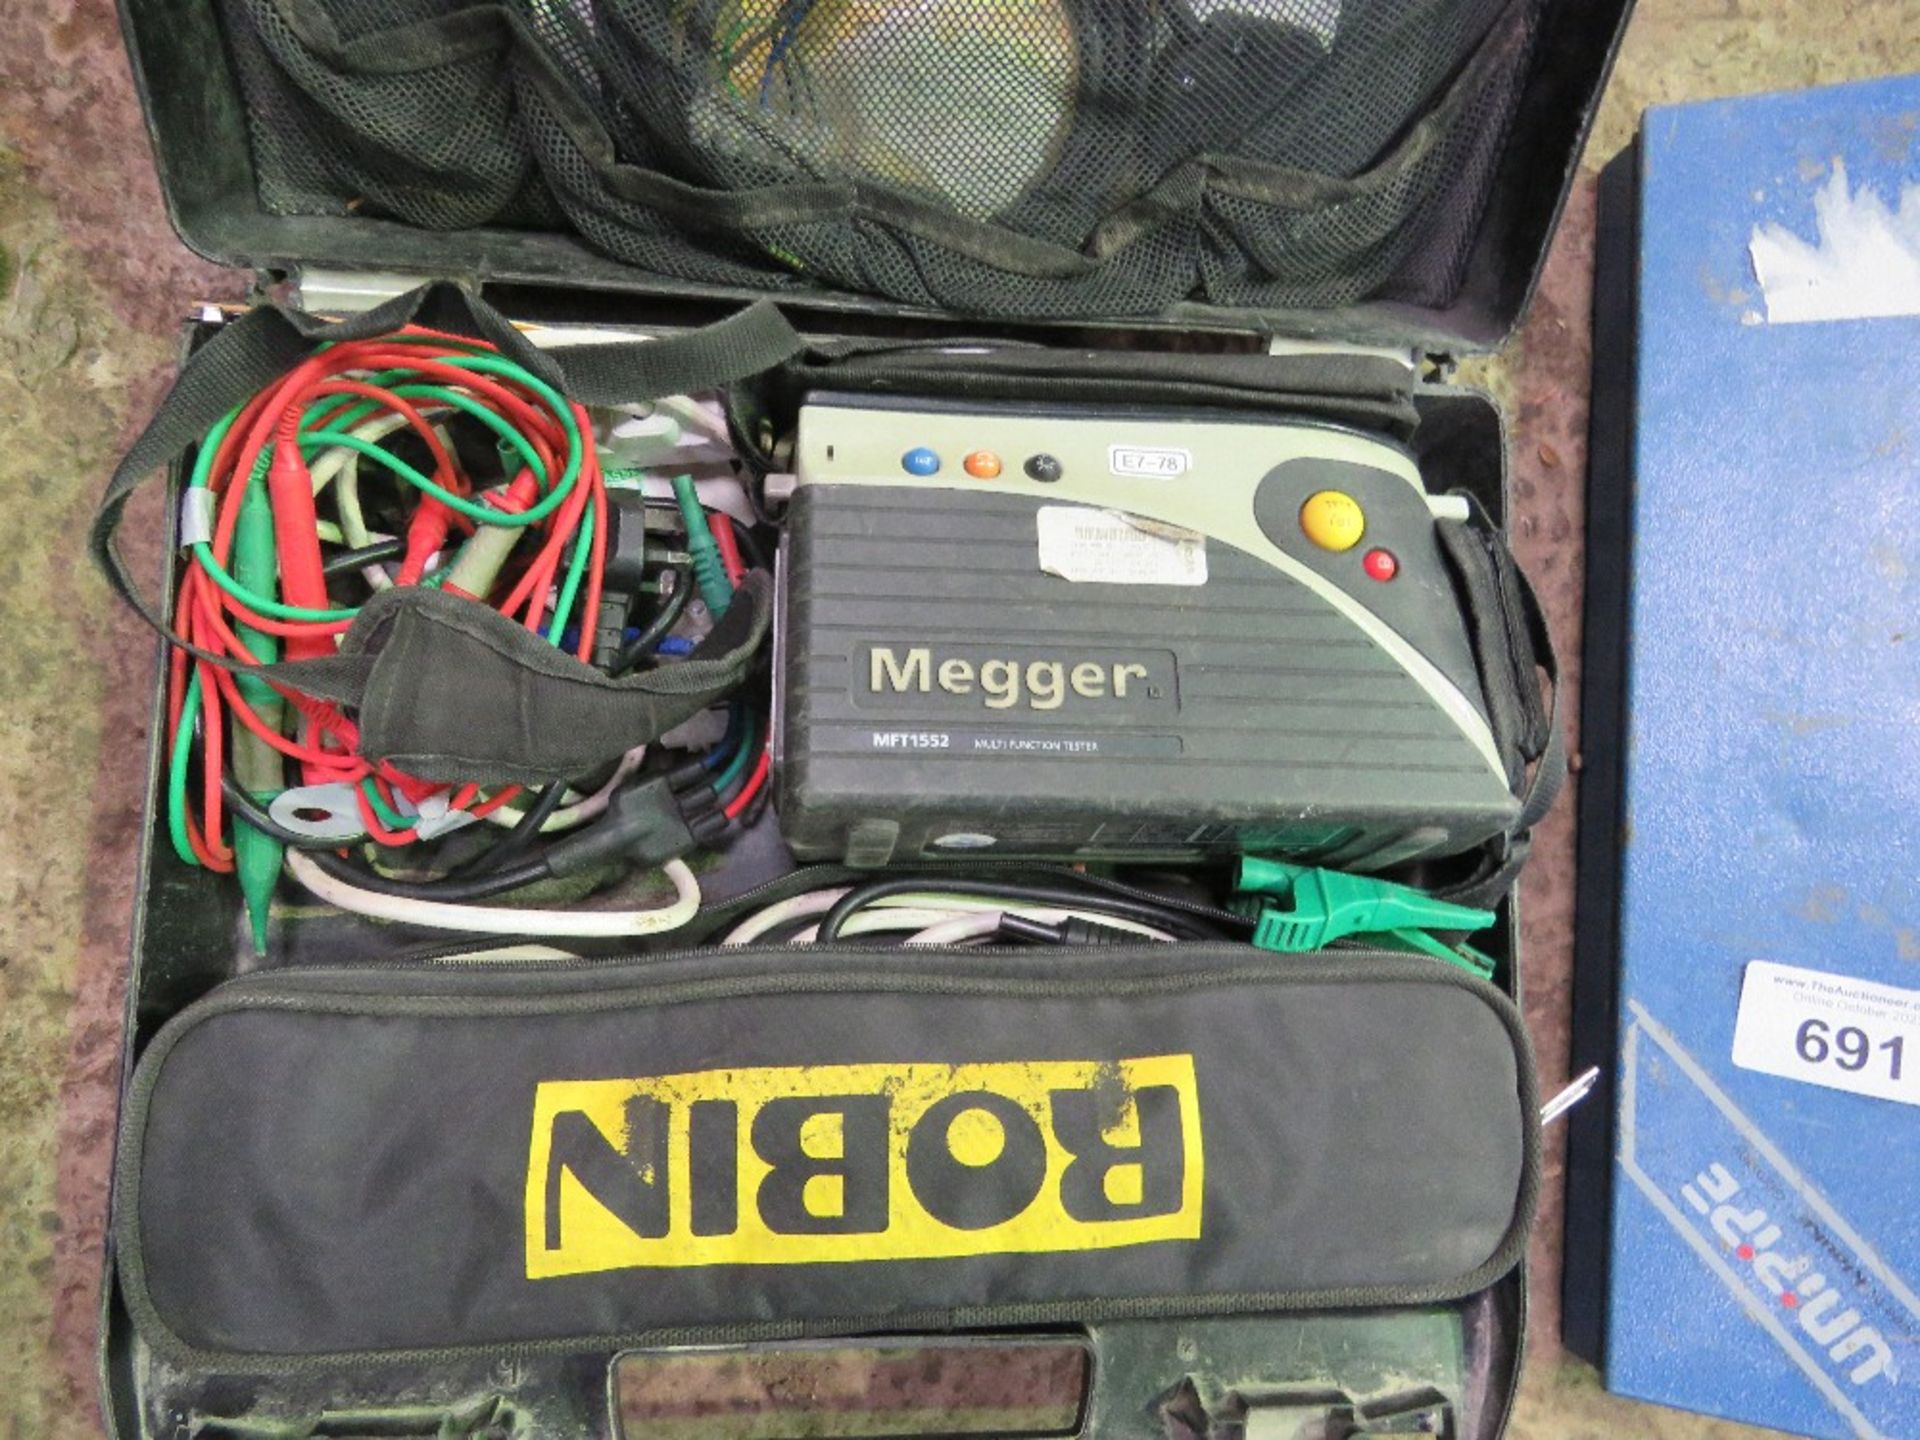 ROBIN MEGGER ELECTRICAL TESTER UNIT SOURCED FROM LARGE CONSTRUCTION COMPANY LIQUIDATION. - Image 7 of 7